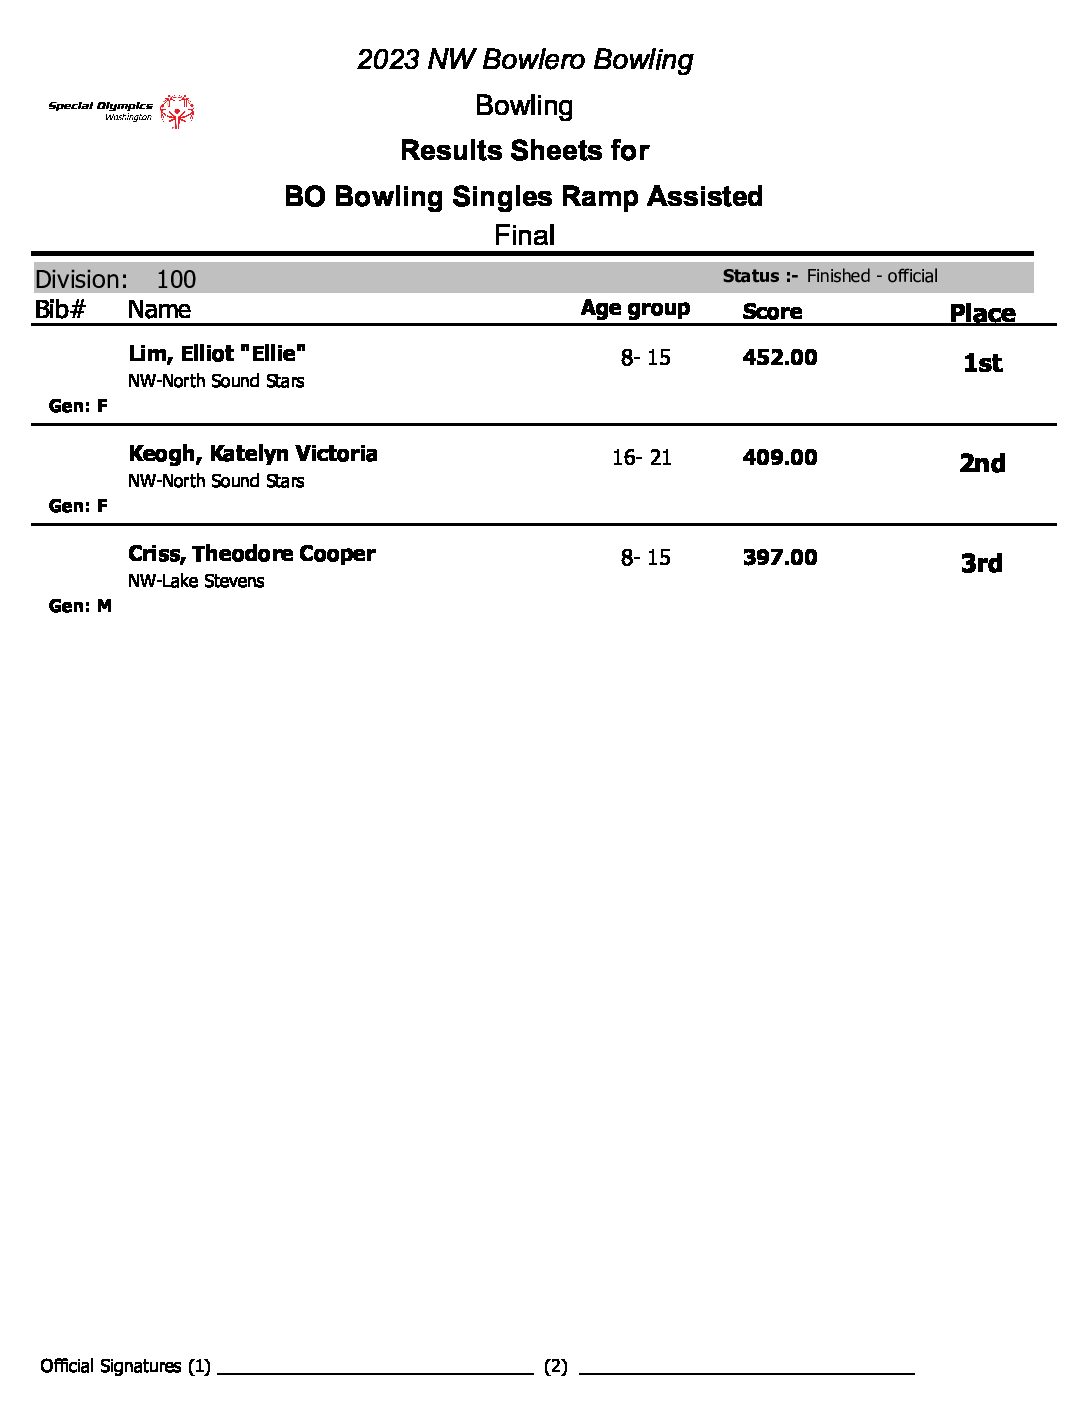 Special Olympics WashingtonFY23 Bowlero Bowling Results Special